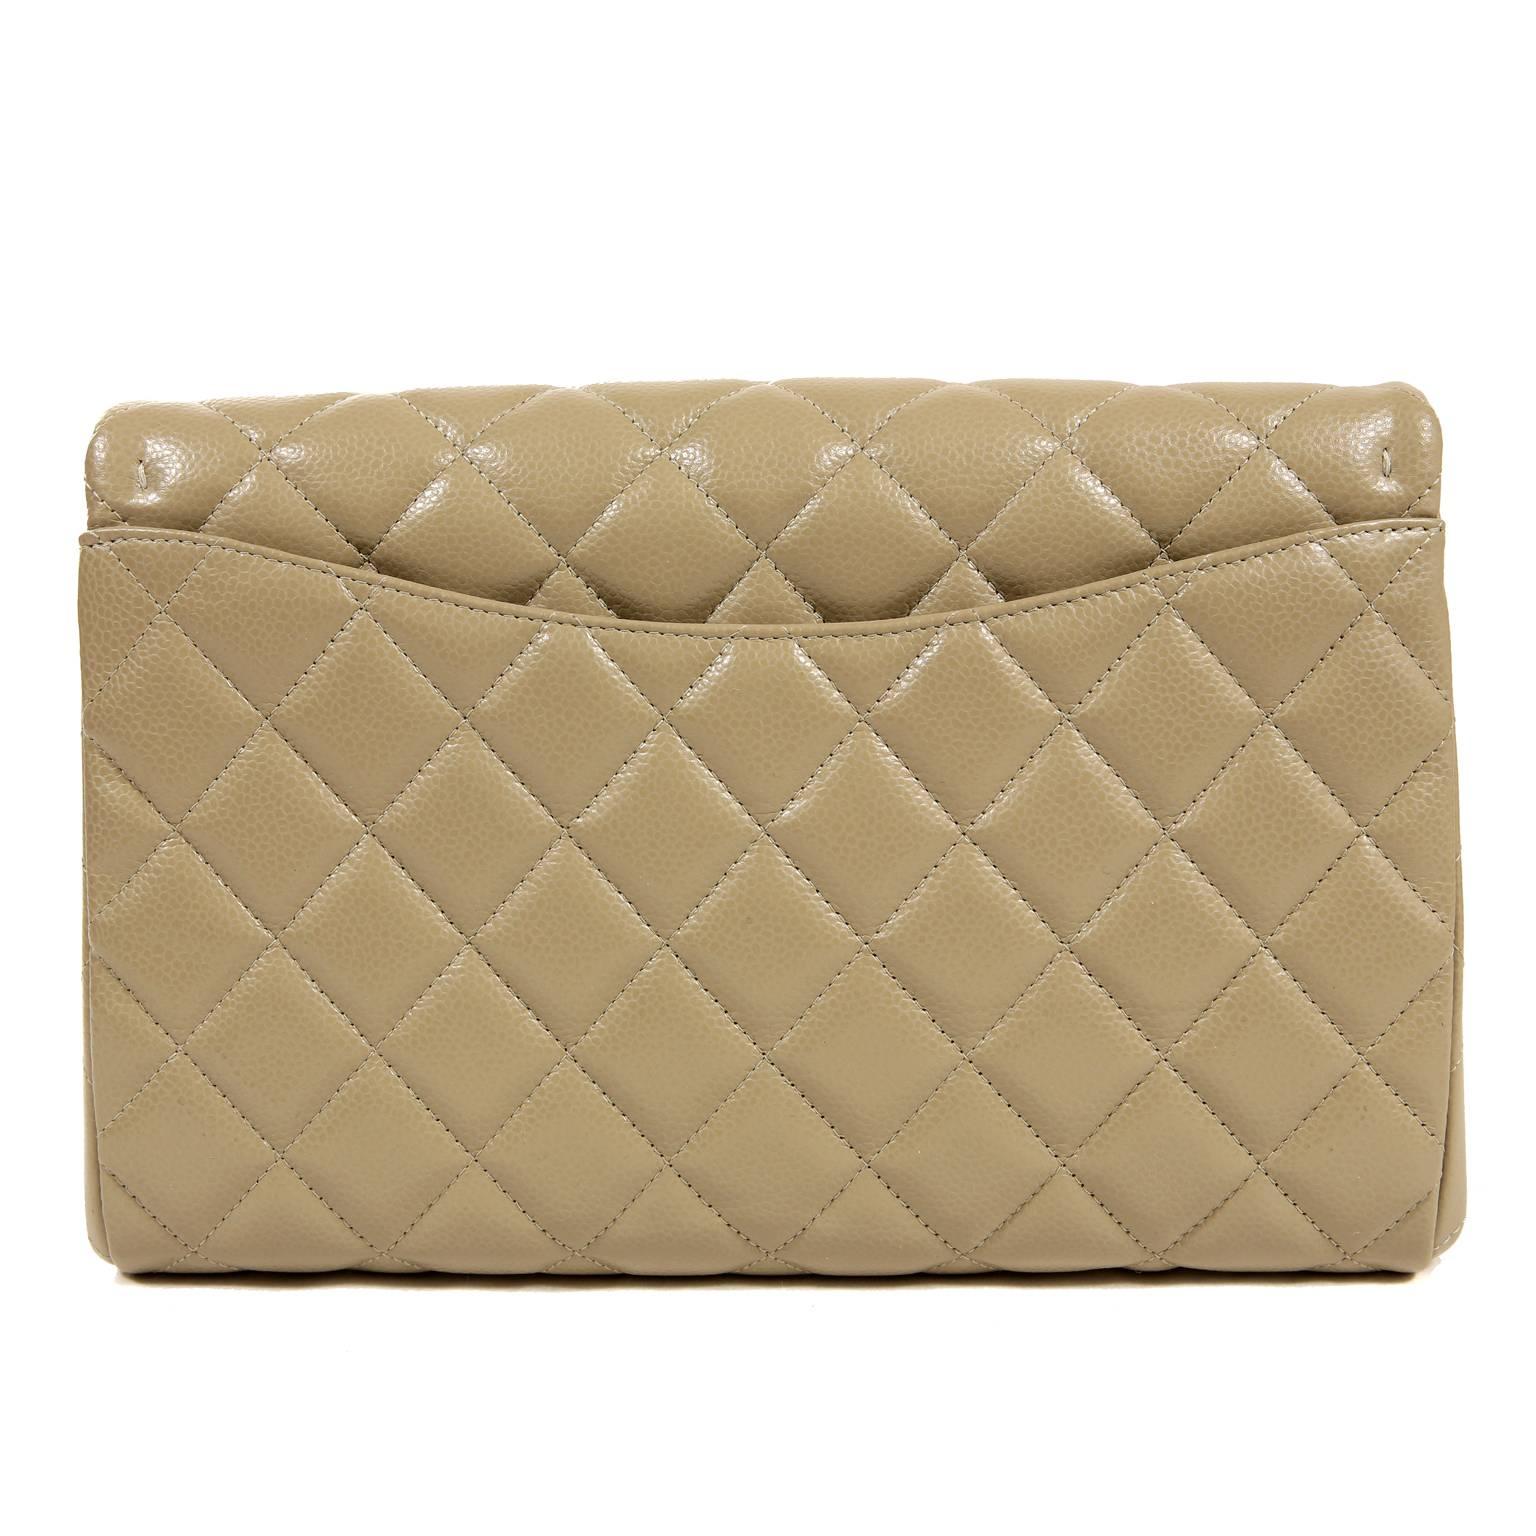 Chanel Etoupe Caviar Clutch Shoulder Bag- PRISTINE; appears never before carried.  
Splendidly versatile, the neutral color, medium size, and optional strap make this Chanel clutch a smart addition to any wardrobe. 
Sophisticated etoupe caviar